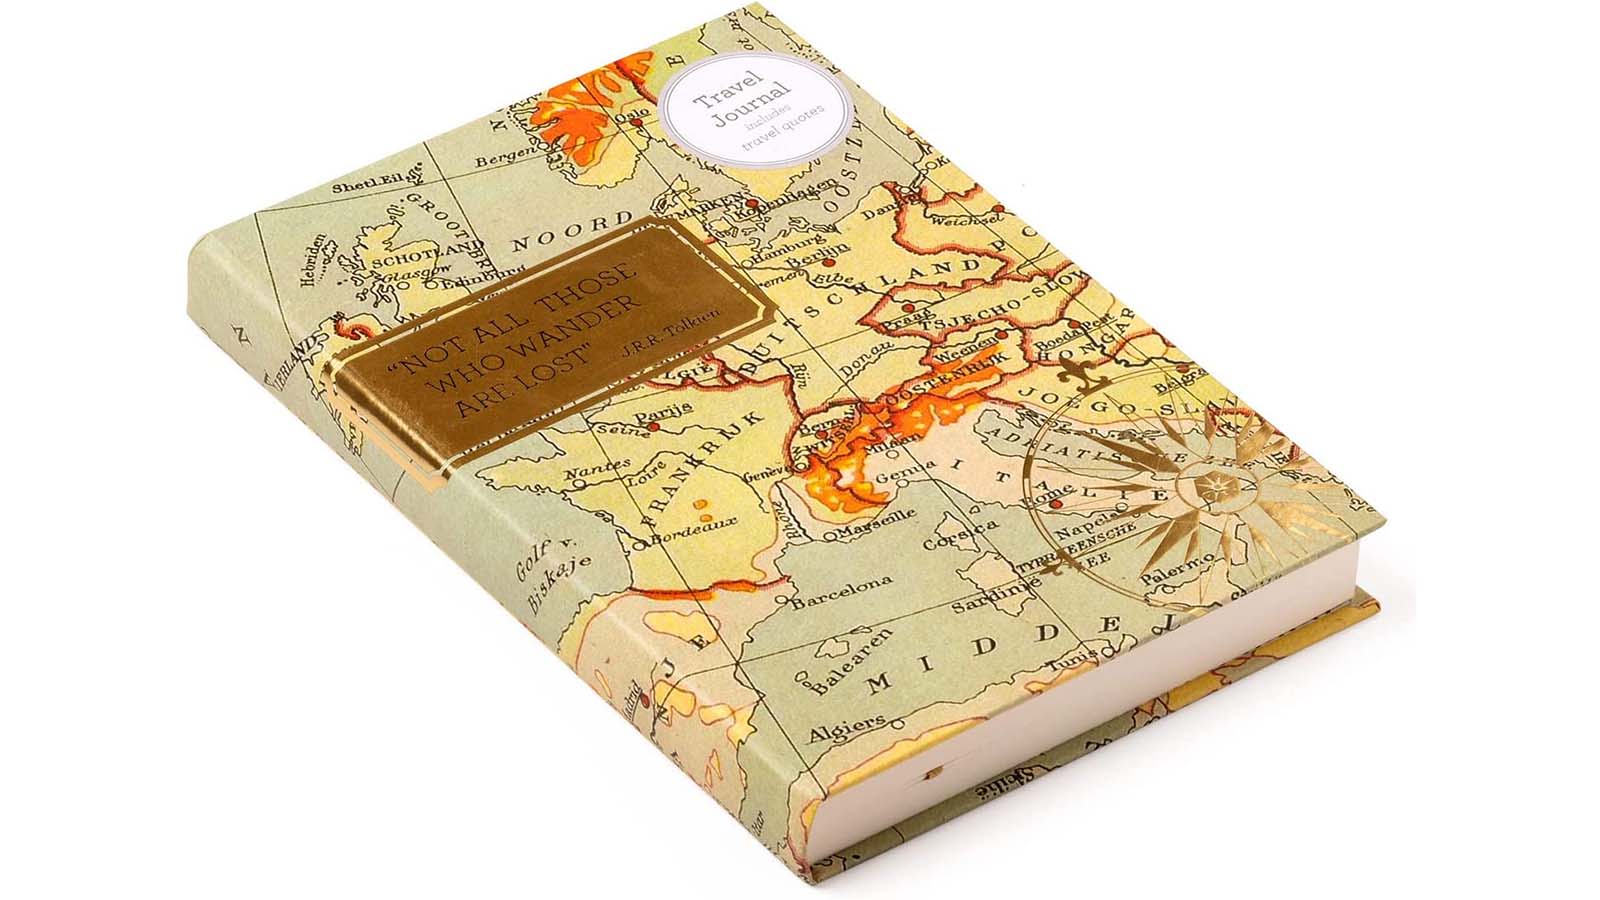 14 Best Travel Journals - A Guide to Choosing the Perfect Travel